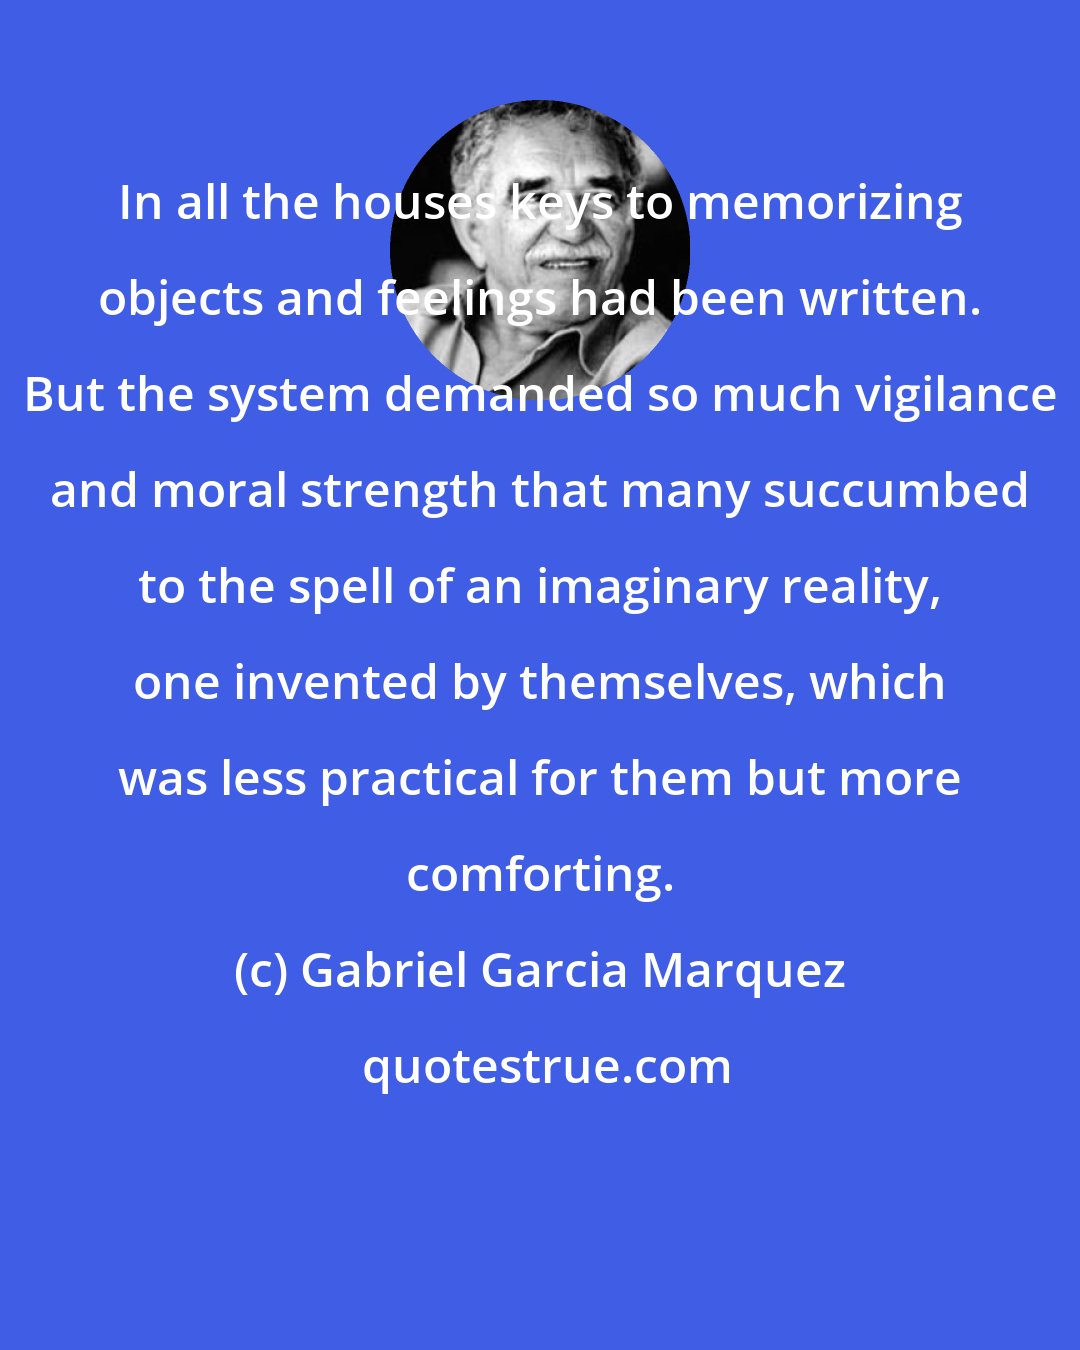 Gabriel Garcia Marquez: In all the houses keys to memorizing objects and feelings had been written. But the system demanded so much vigilance and moral strength that many succumbed to the spell of an imaginary reality, one invented by themselves, which was less practical for them but more comforting.